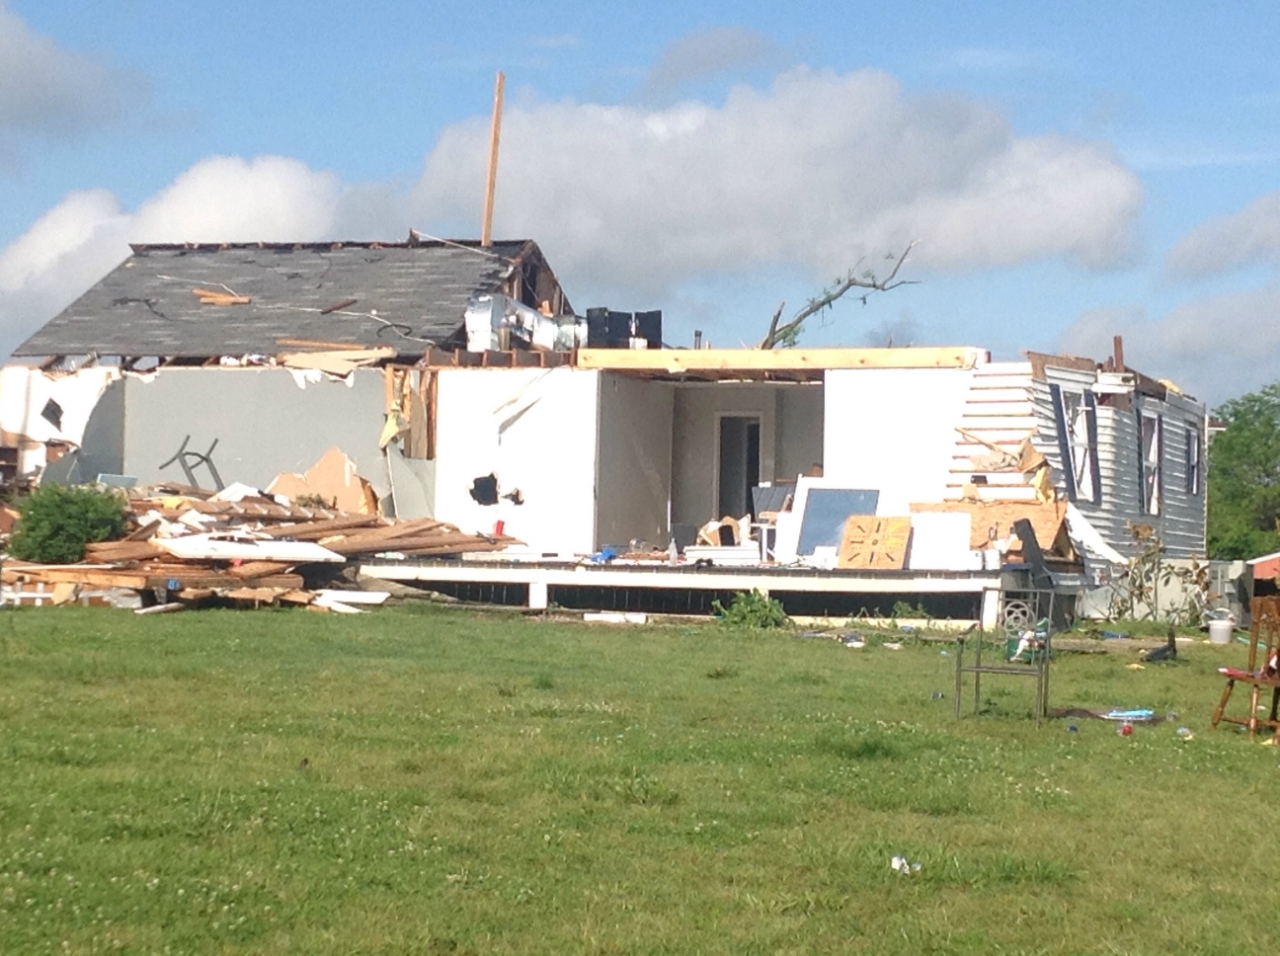 House destroyed several miles northeast of Mayfield, KY